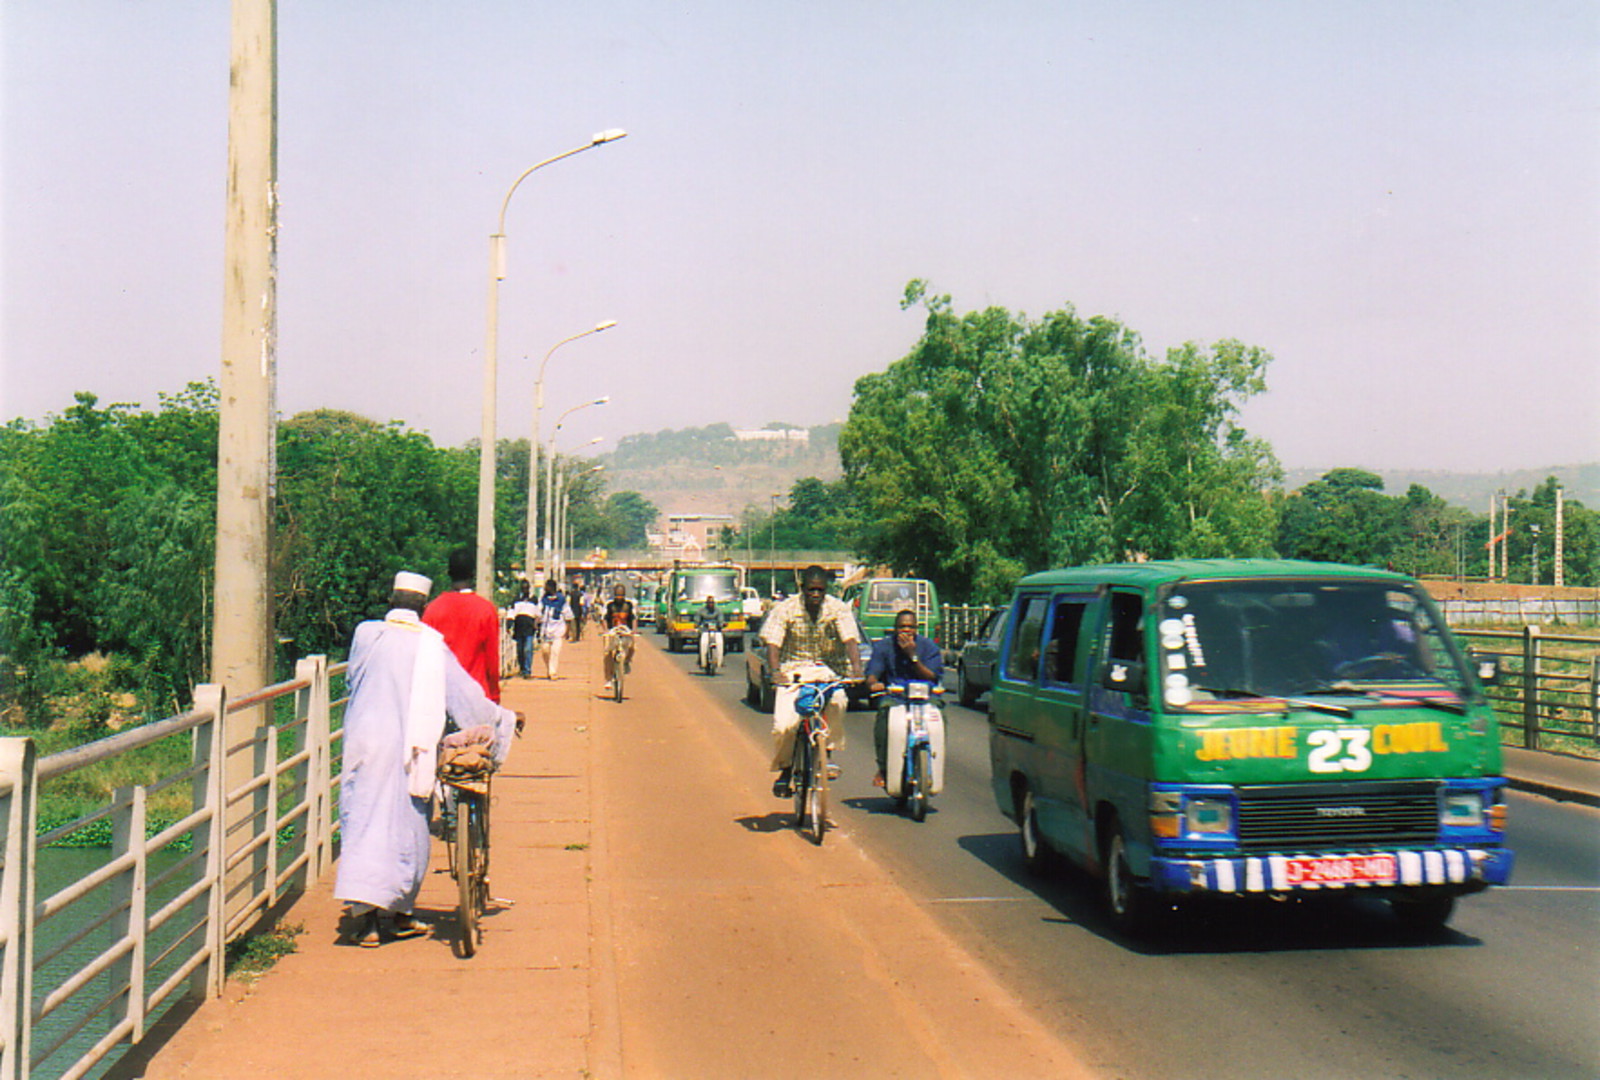 A busy road in Bamako